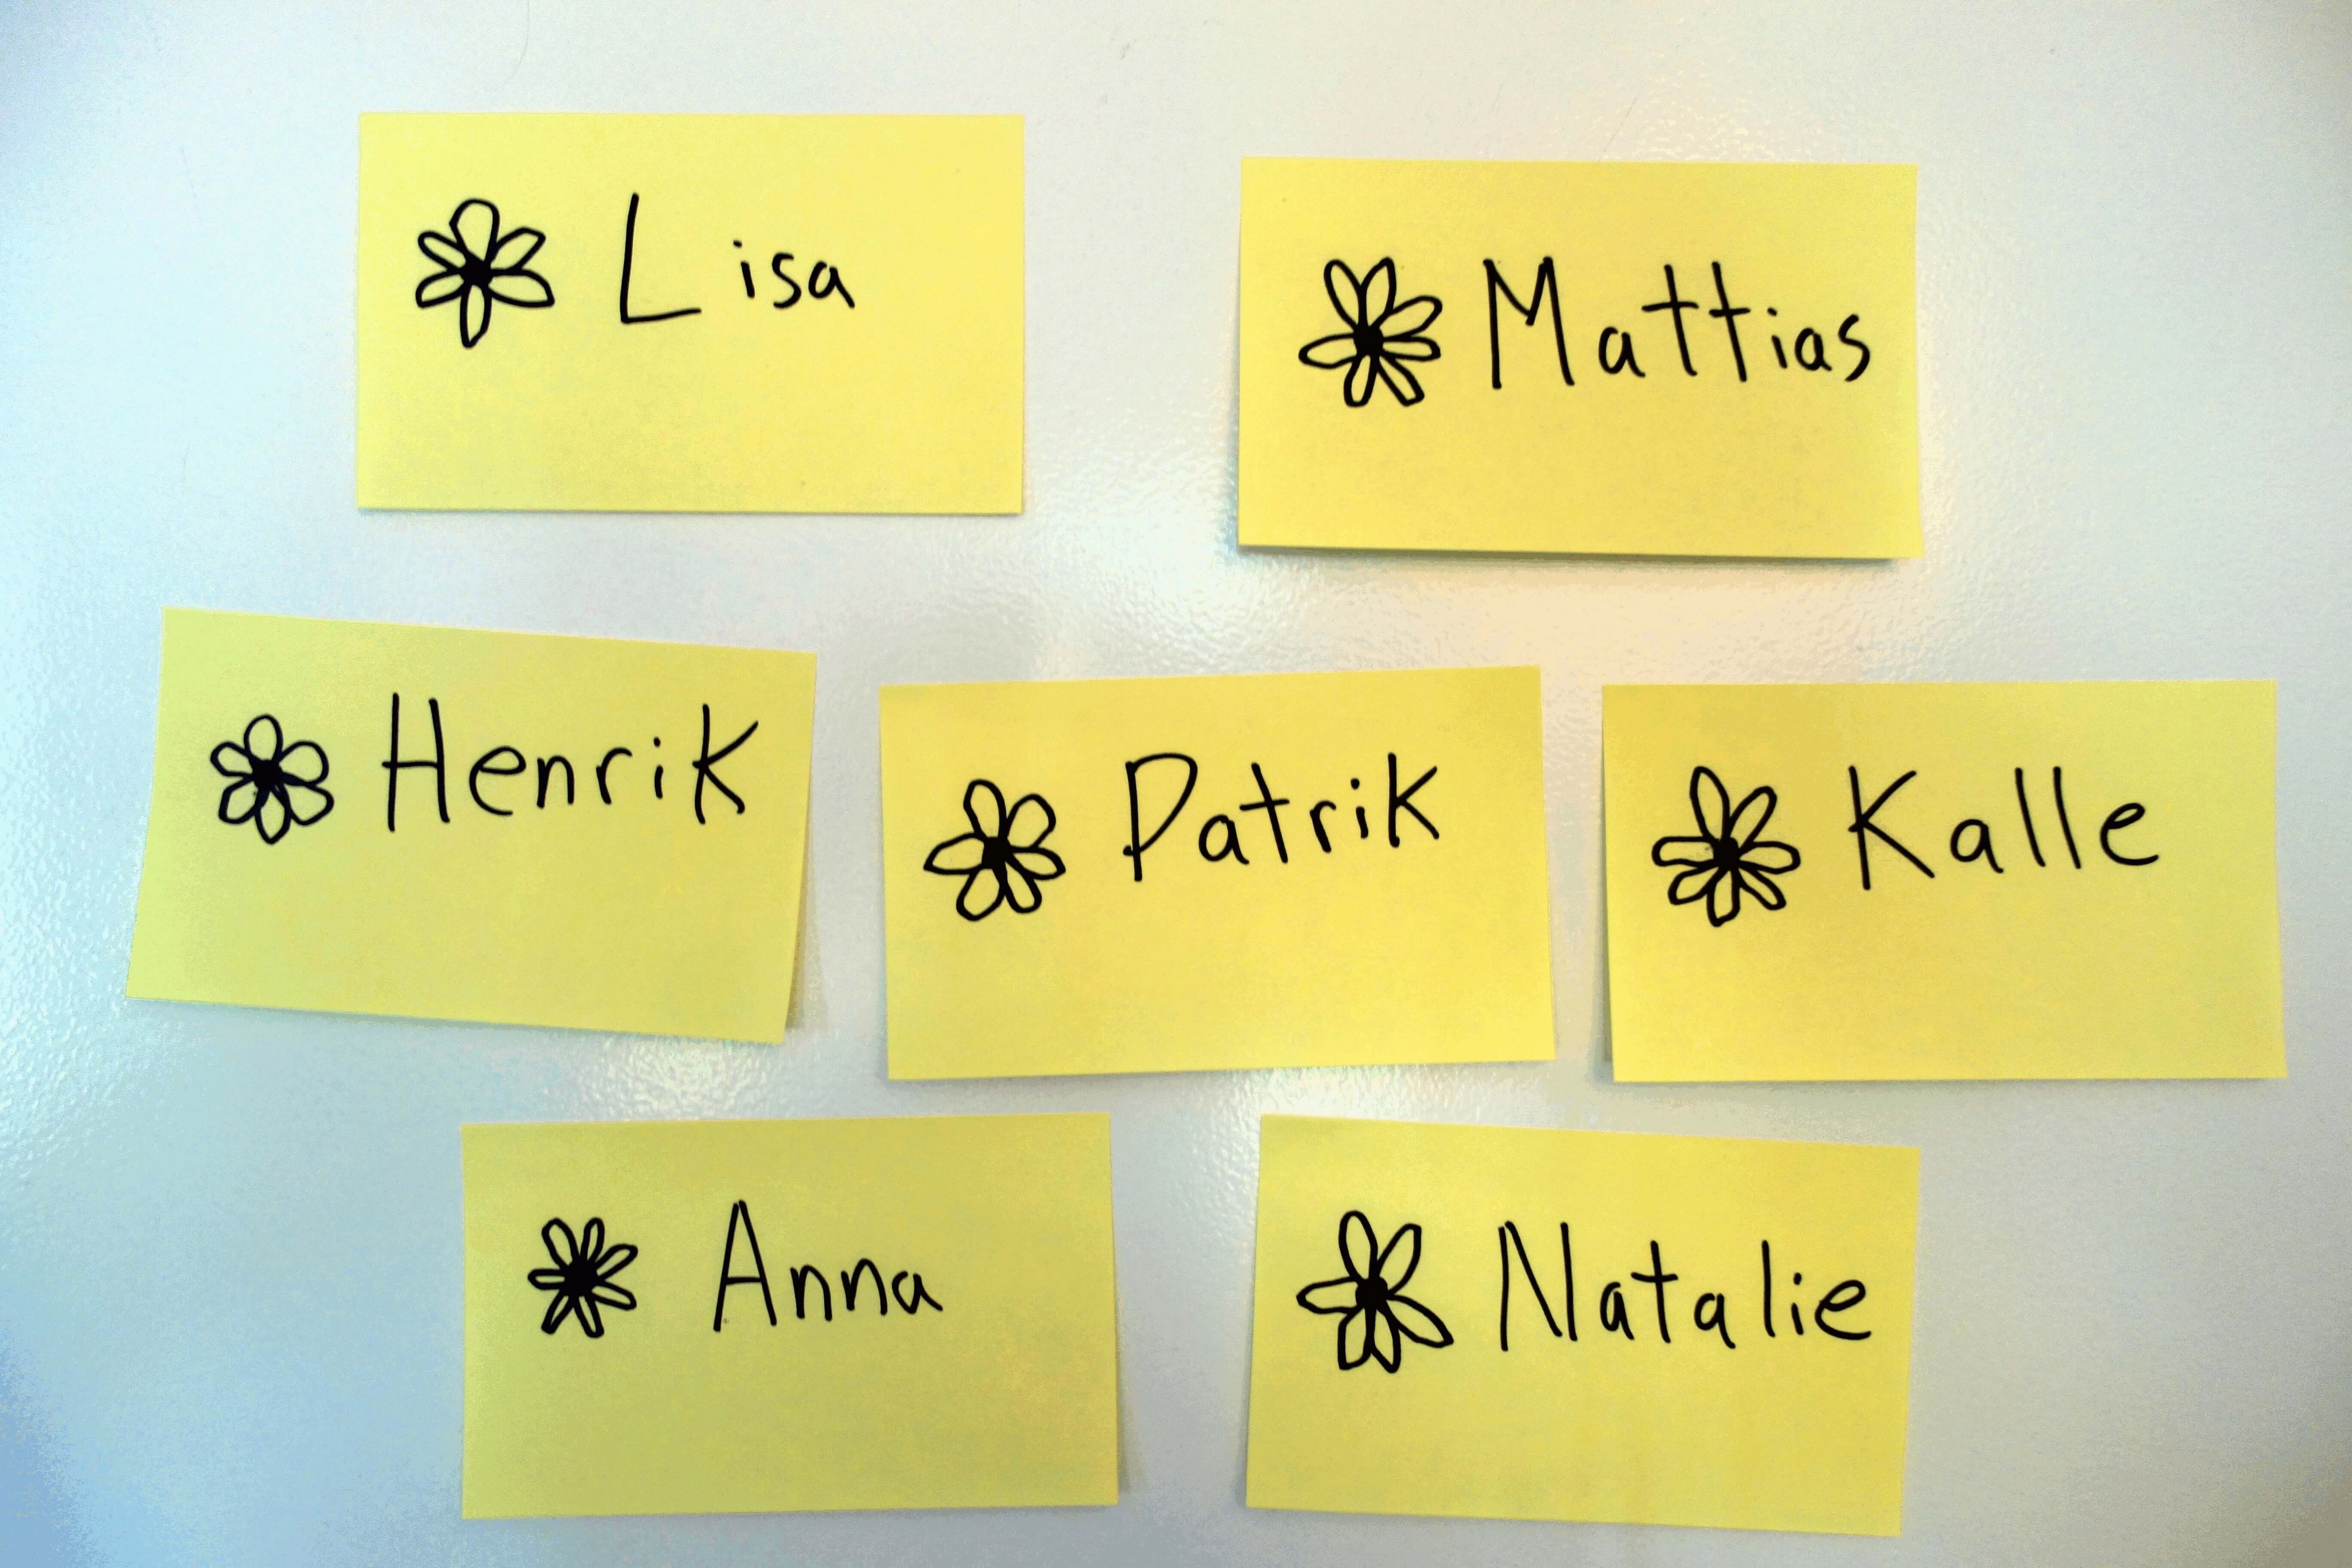 A few crudely drawn flowers to my current reviewers.